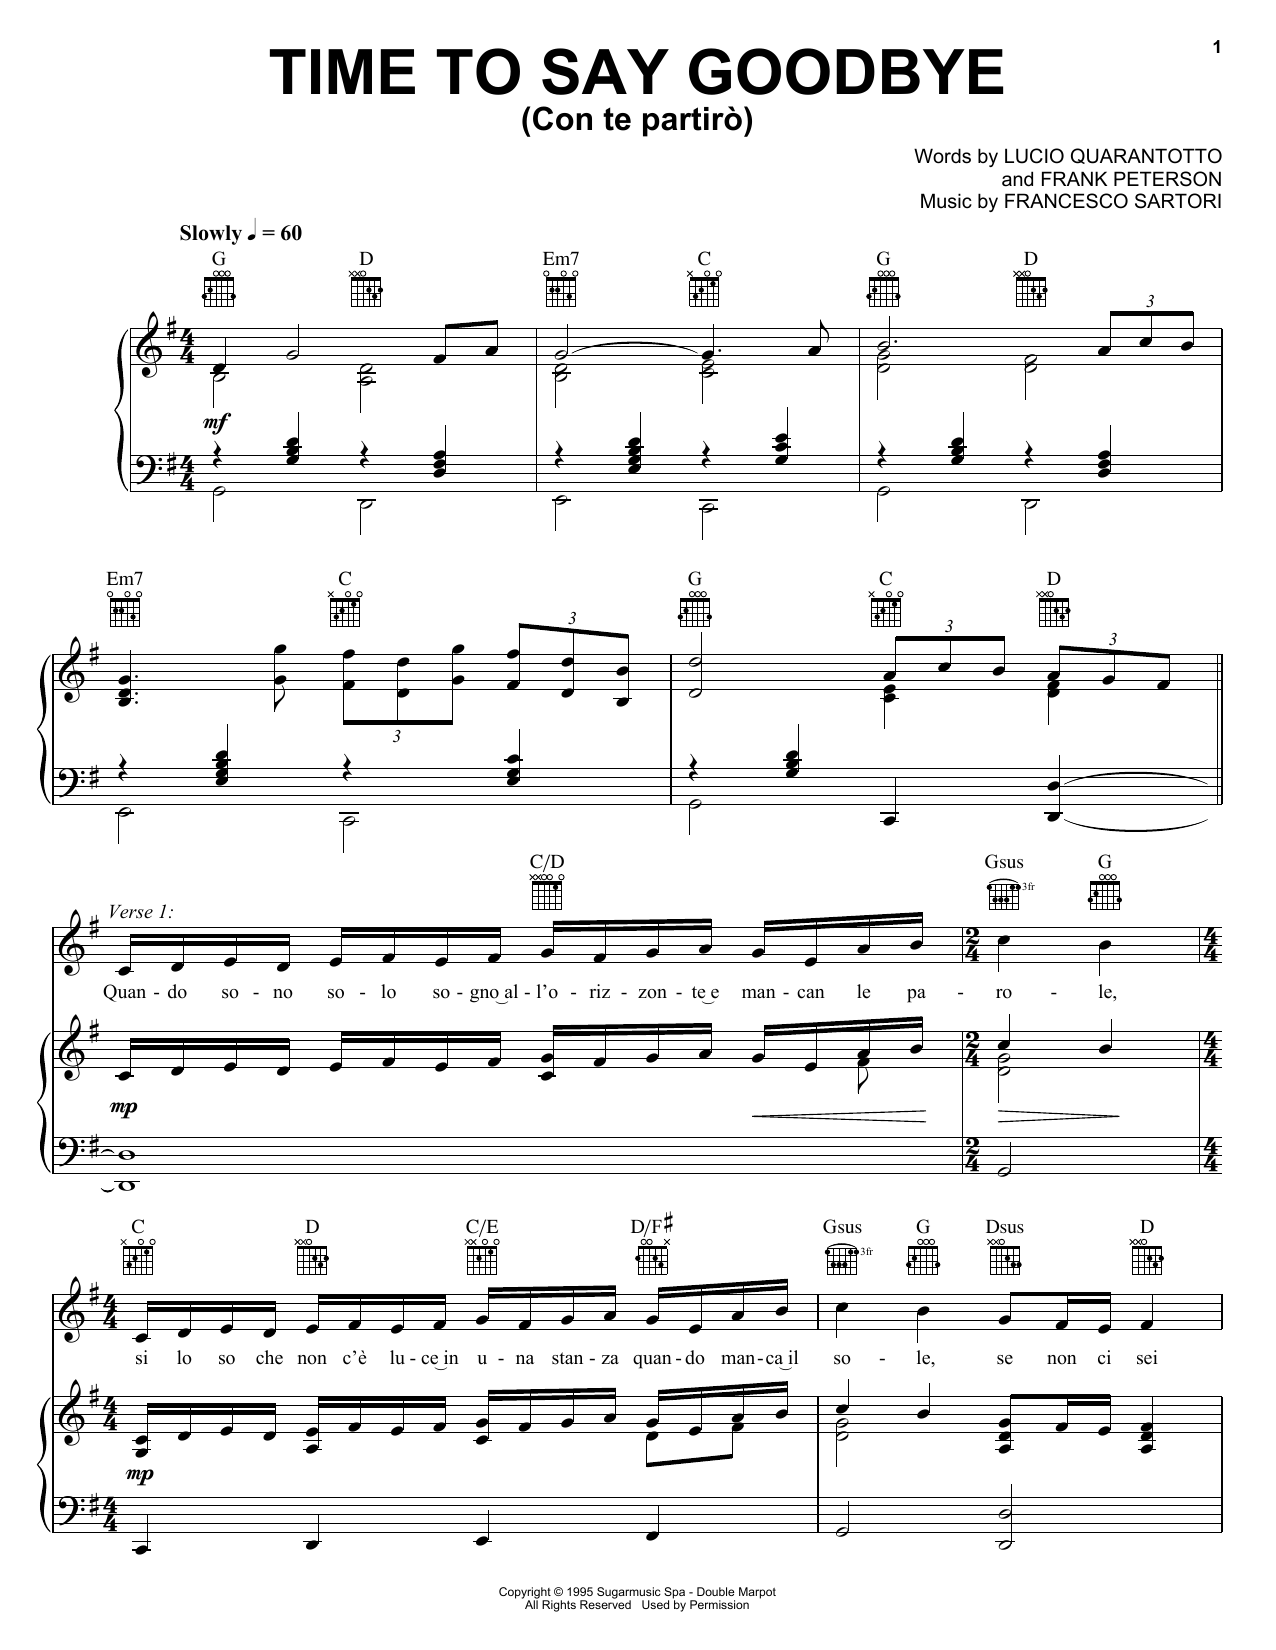 Sarah Brightman with Andrea Bocelli Time To Say Goodbye sheet music notes and chords. Download Printable PDF.